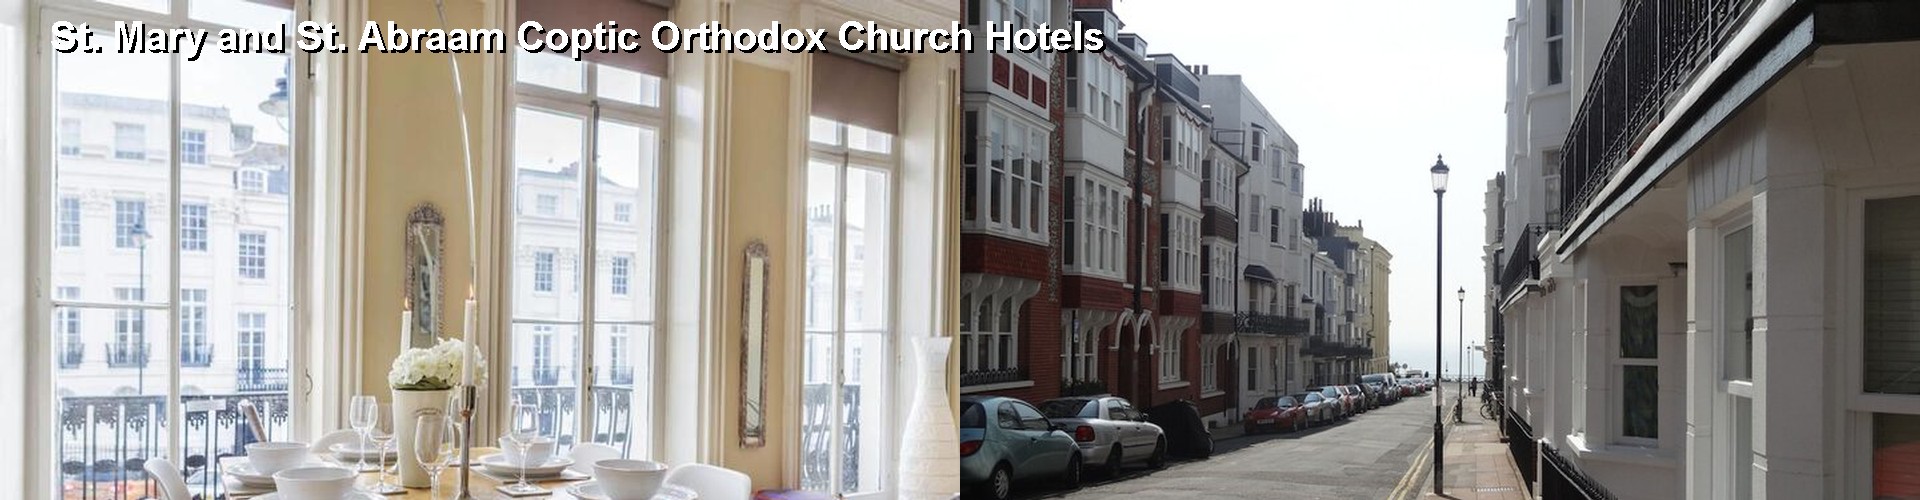 4 Best Hotels near St. Mary and St. Abraam Coptic Orthodox Church